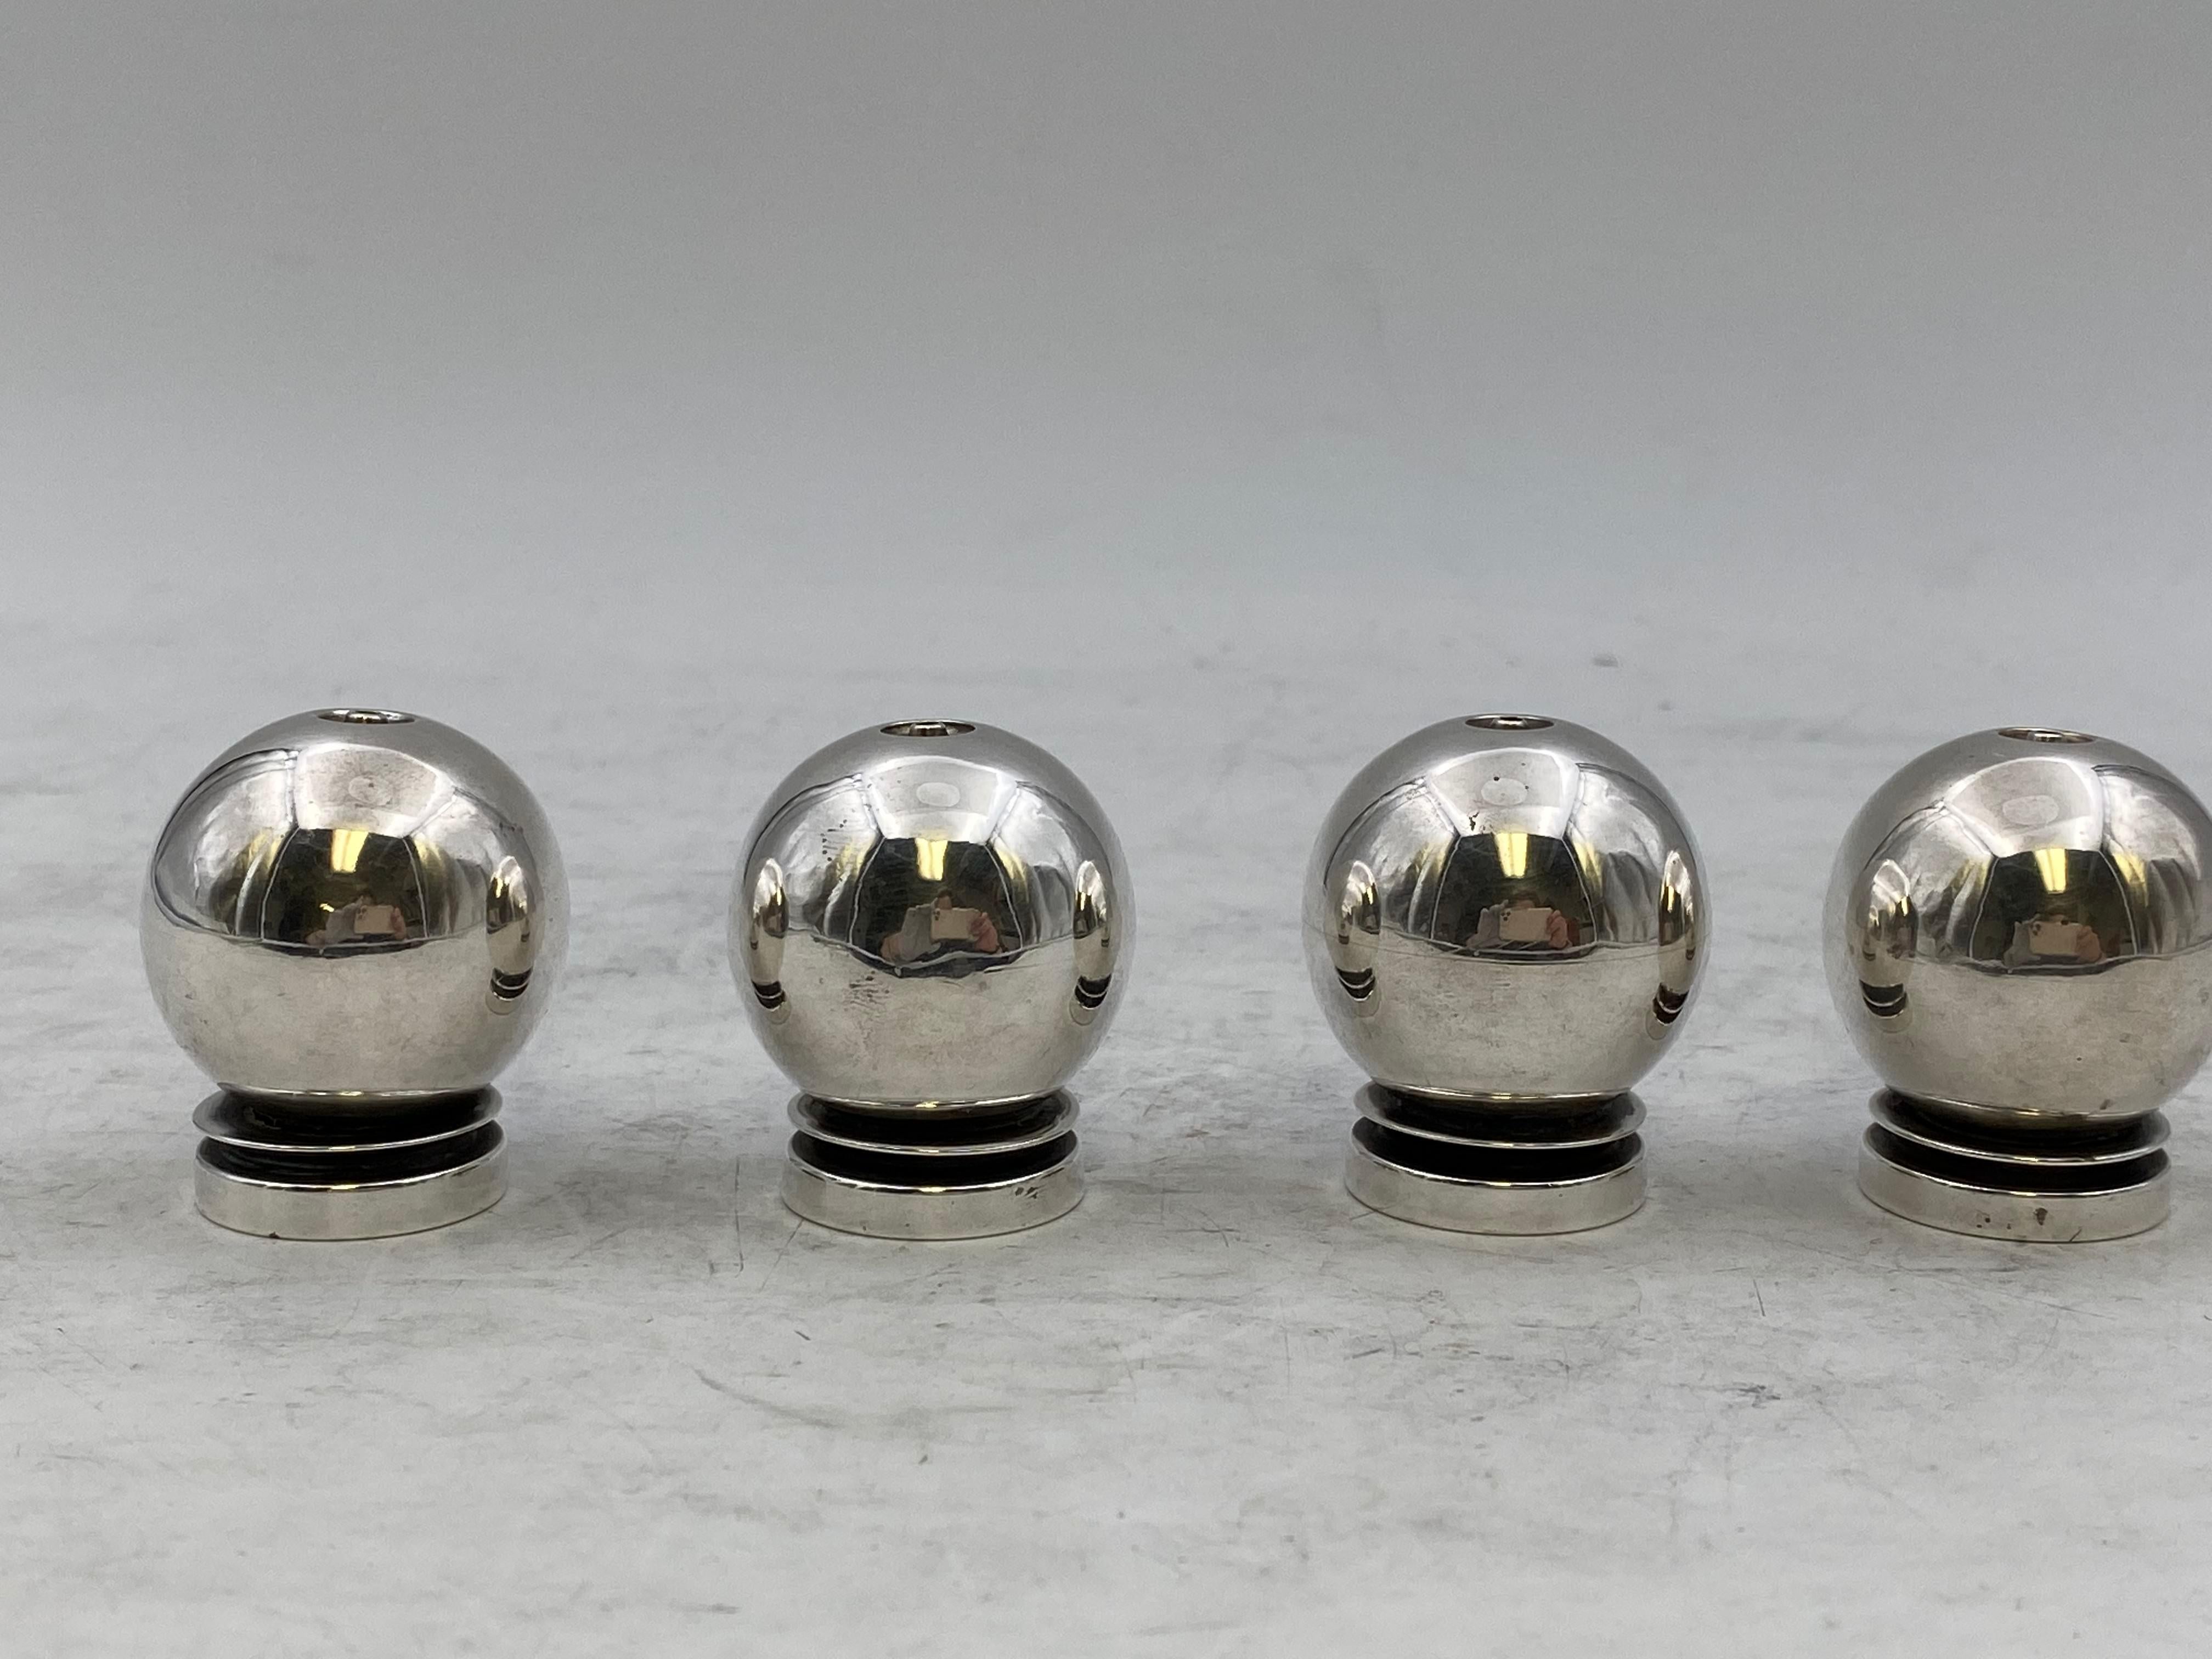 Georg Jensen sterling silver shakers in Pyramid pattern, circa 1933-1944. Measuring 1.5